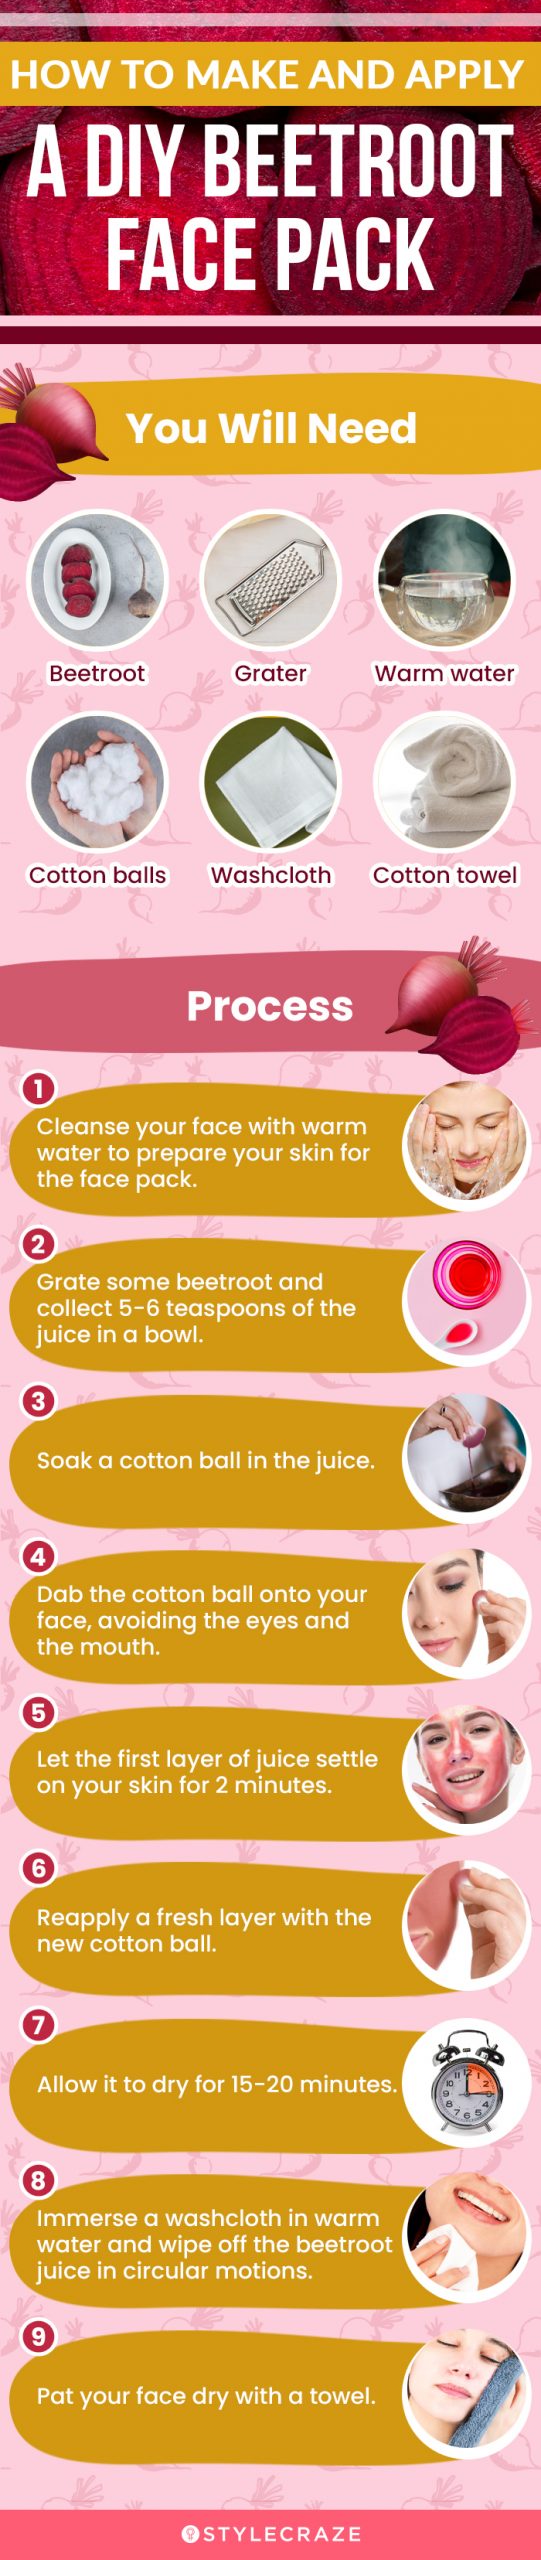 how to make and apply a diy beetroot face pack (infographic)